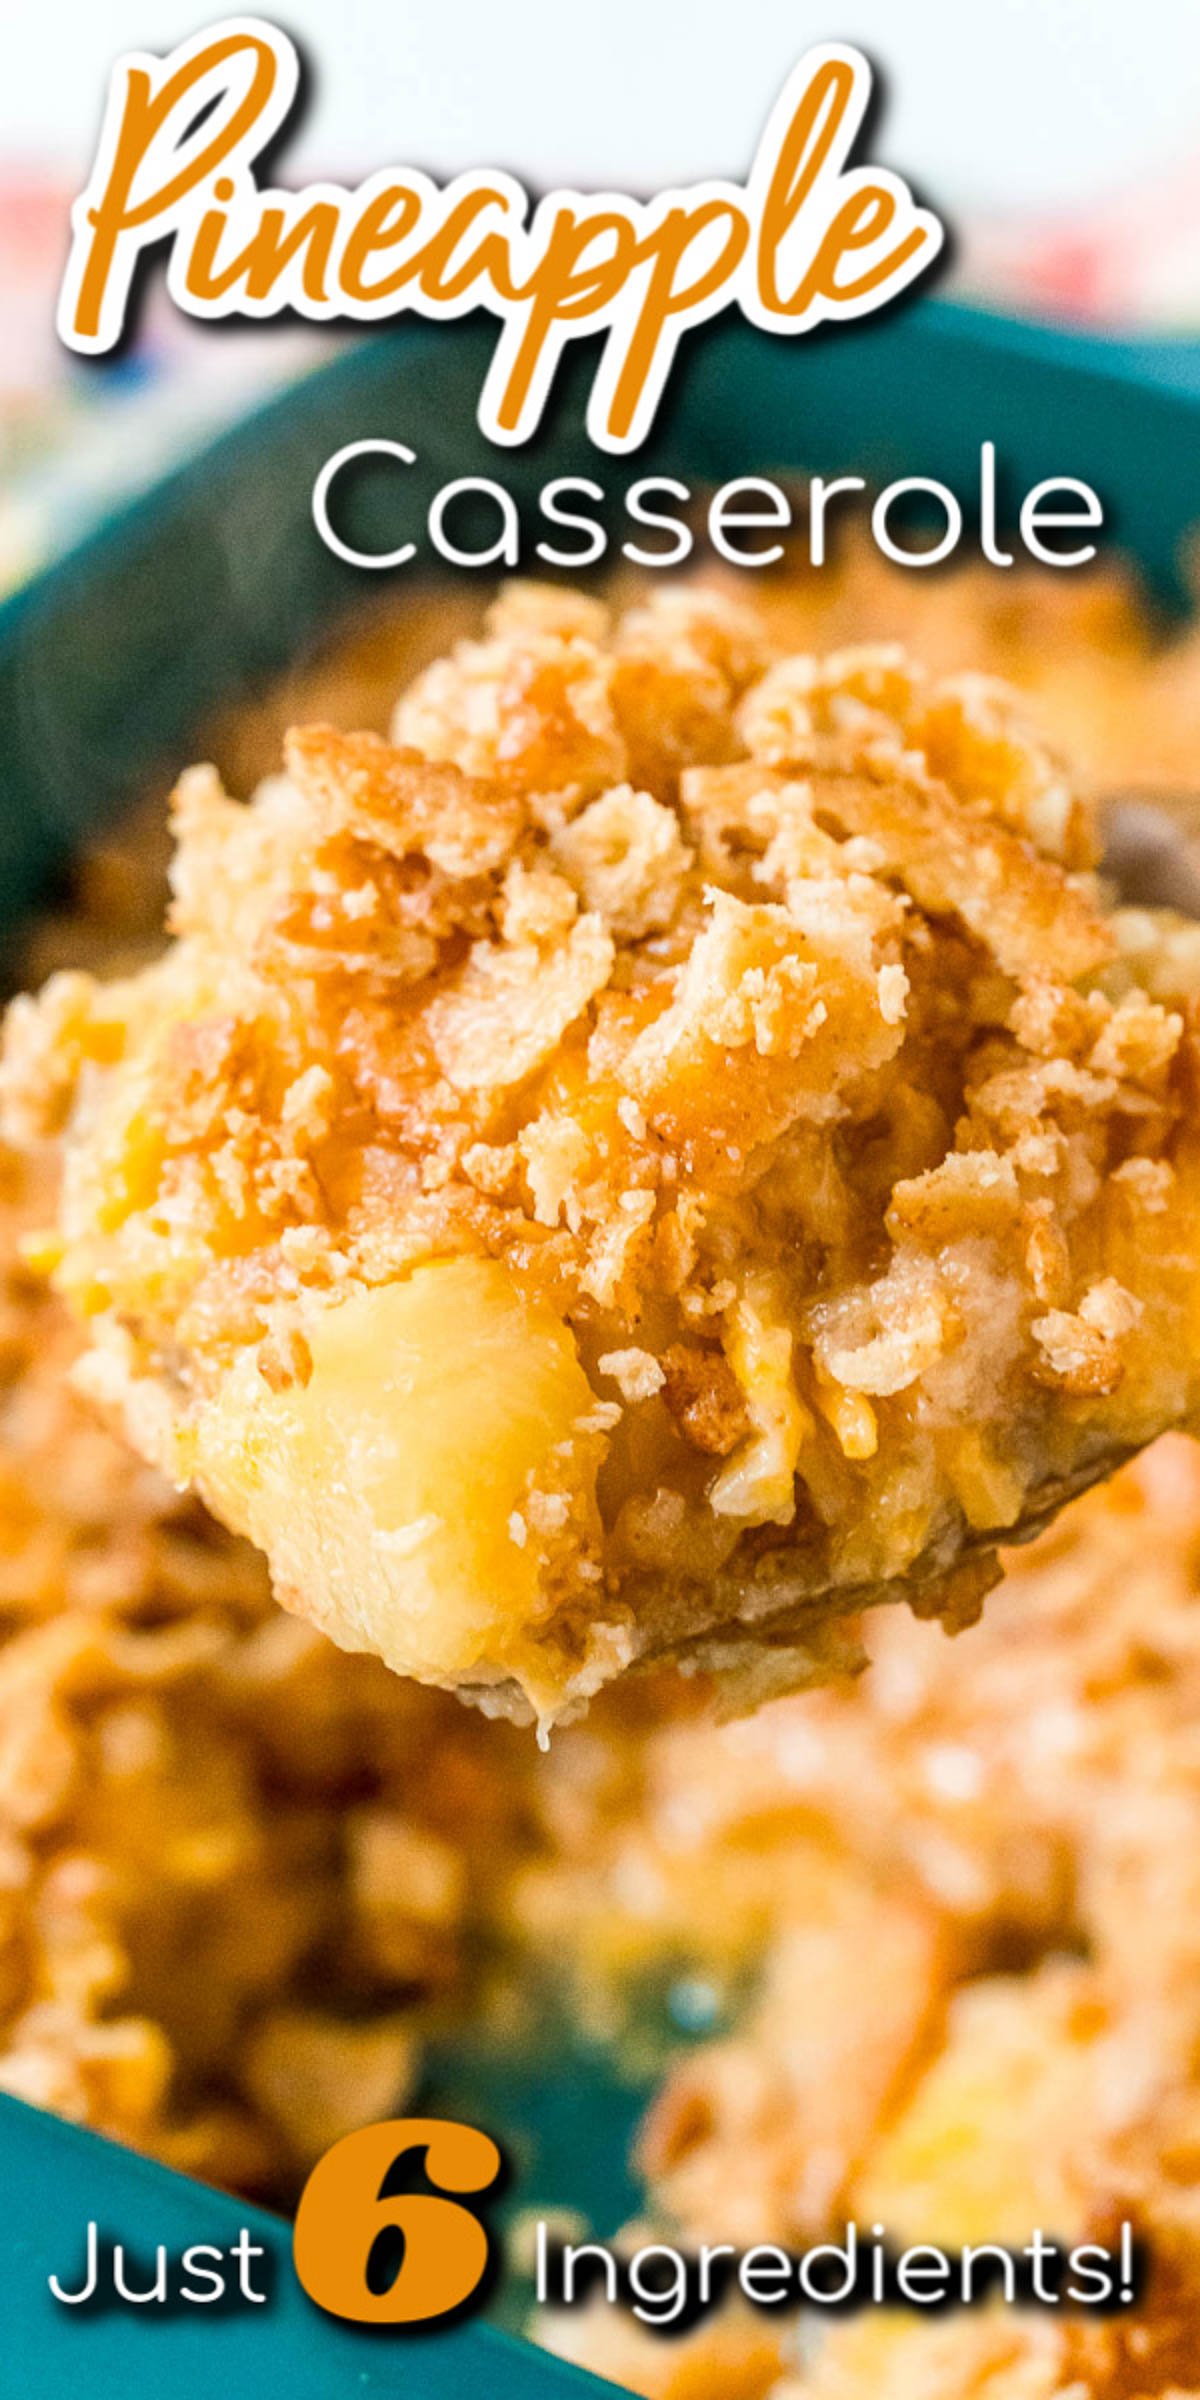 Pineapple Casserole is a salty-sweet side dish that's popular in the South and always a hit at pot lucks. It's made with pineapple, cheddar cheese, salty crackers, and a few other ingredients and takes just 5 minutes to prepare! via @sugarandsoulco